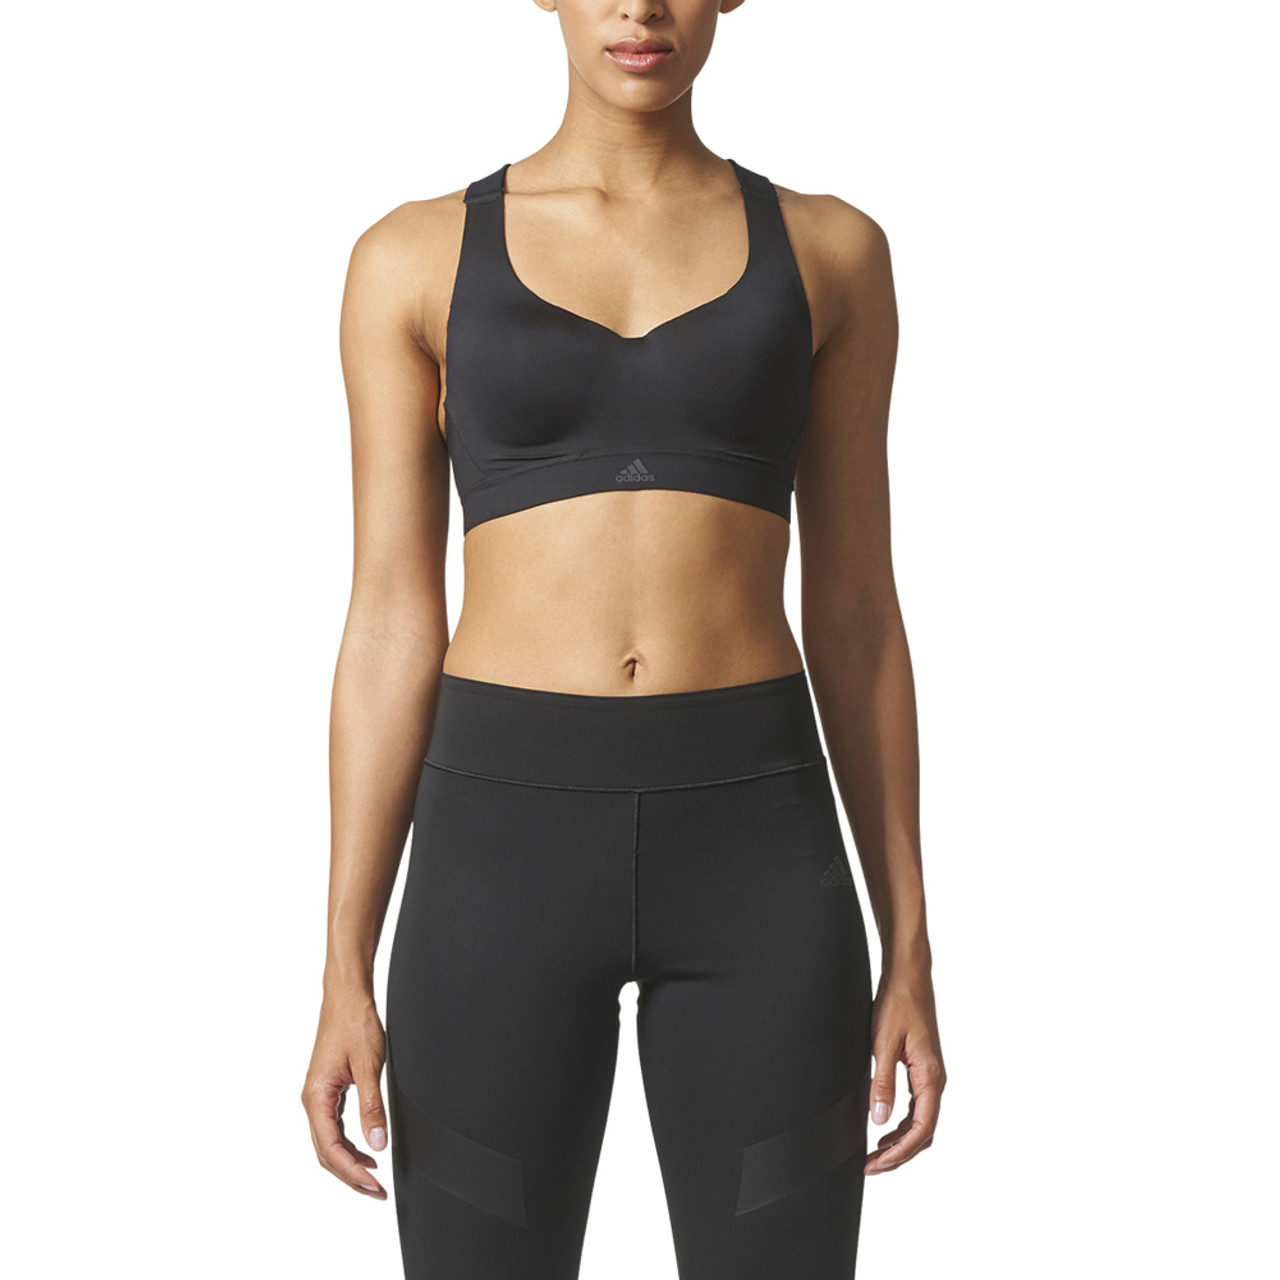 Adidas Women's Committed High Support Racerback Bra - Black, Discount  Adidas Apparel Ladies SportsBras & More 